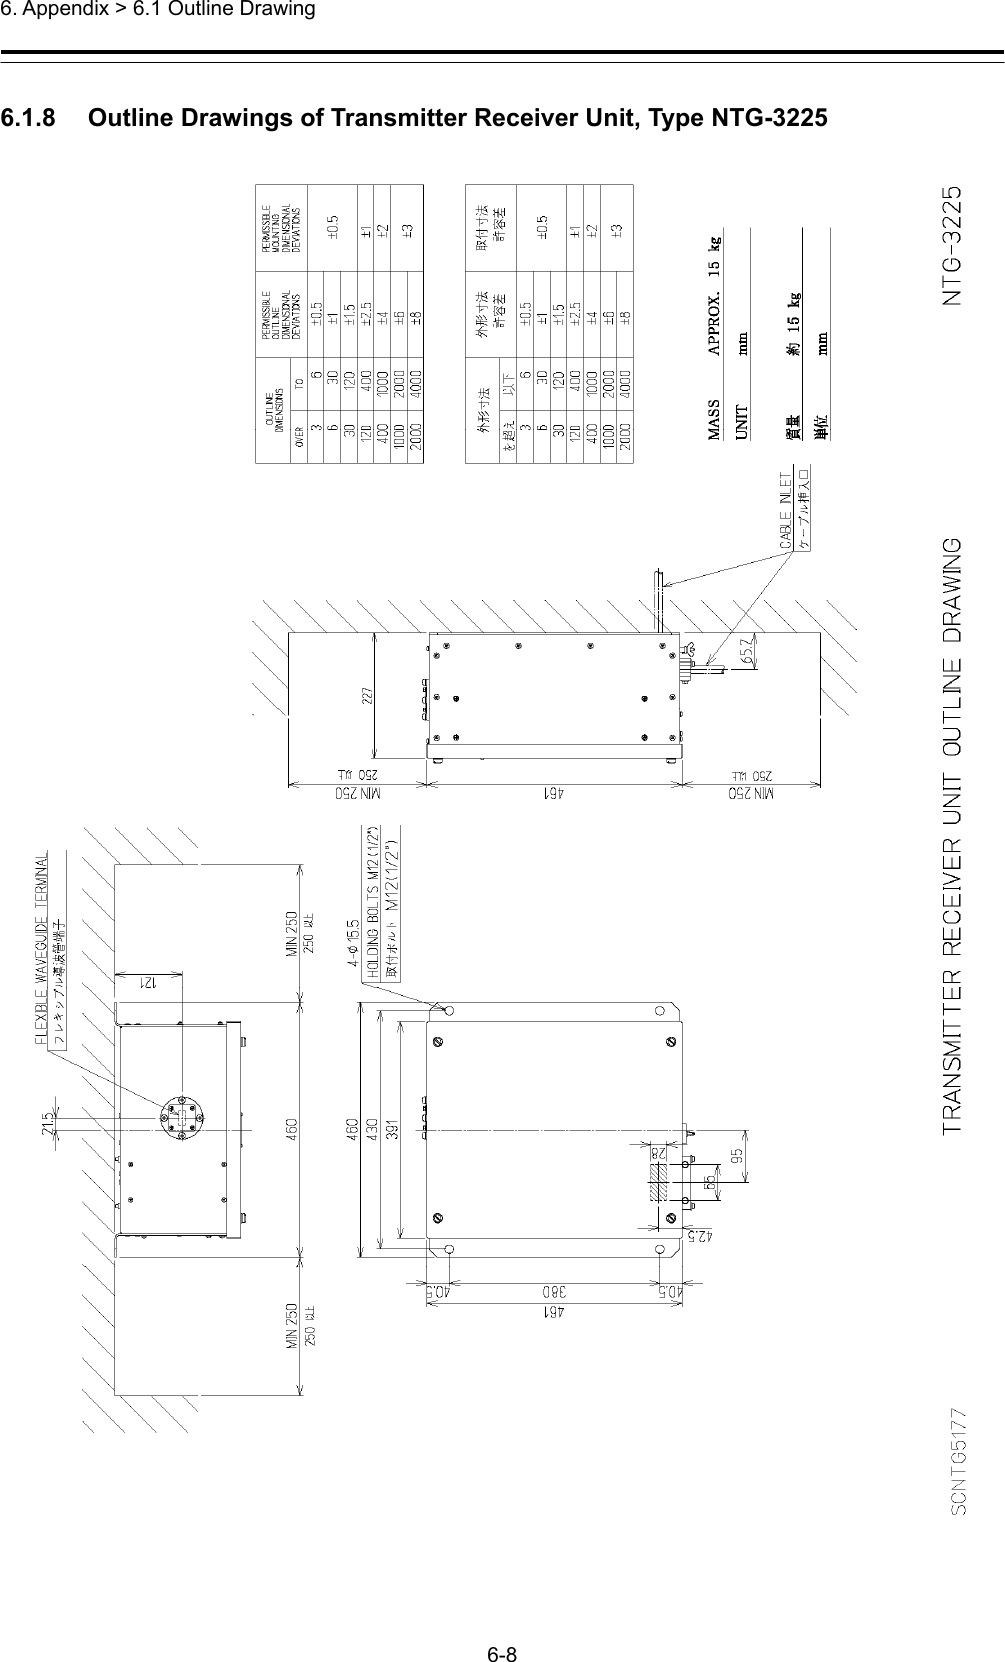  6. Appendix &gt; 6.1 Outline Drawing 6-8  6.1.8    Outline Drawings of Transmitter Receiver Unit, Type NTG-3225  